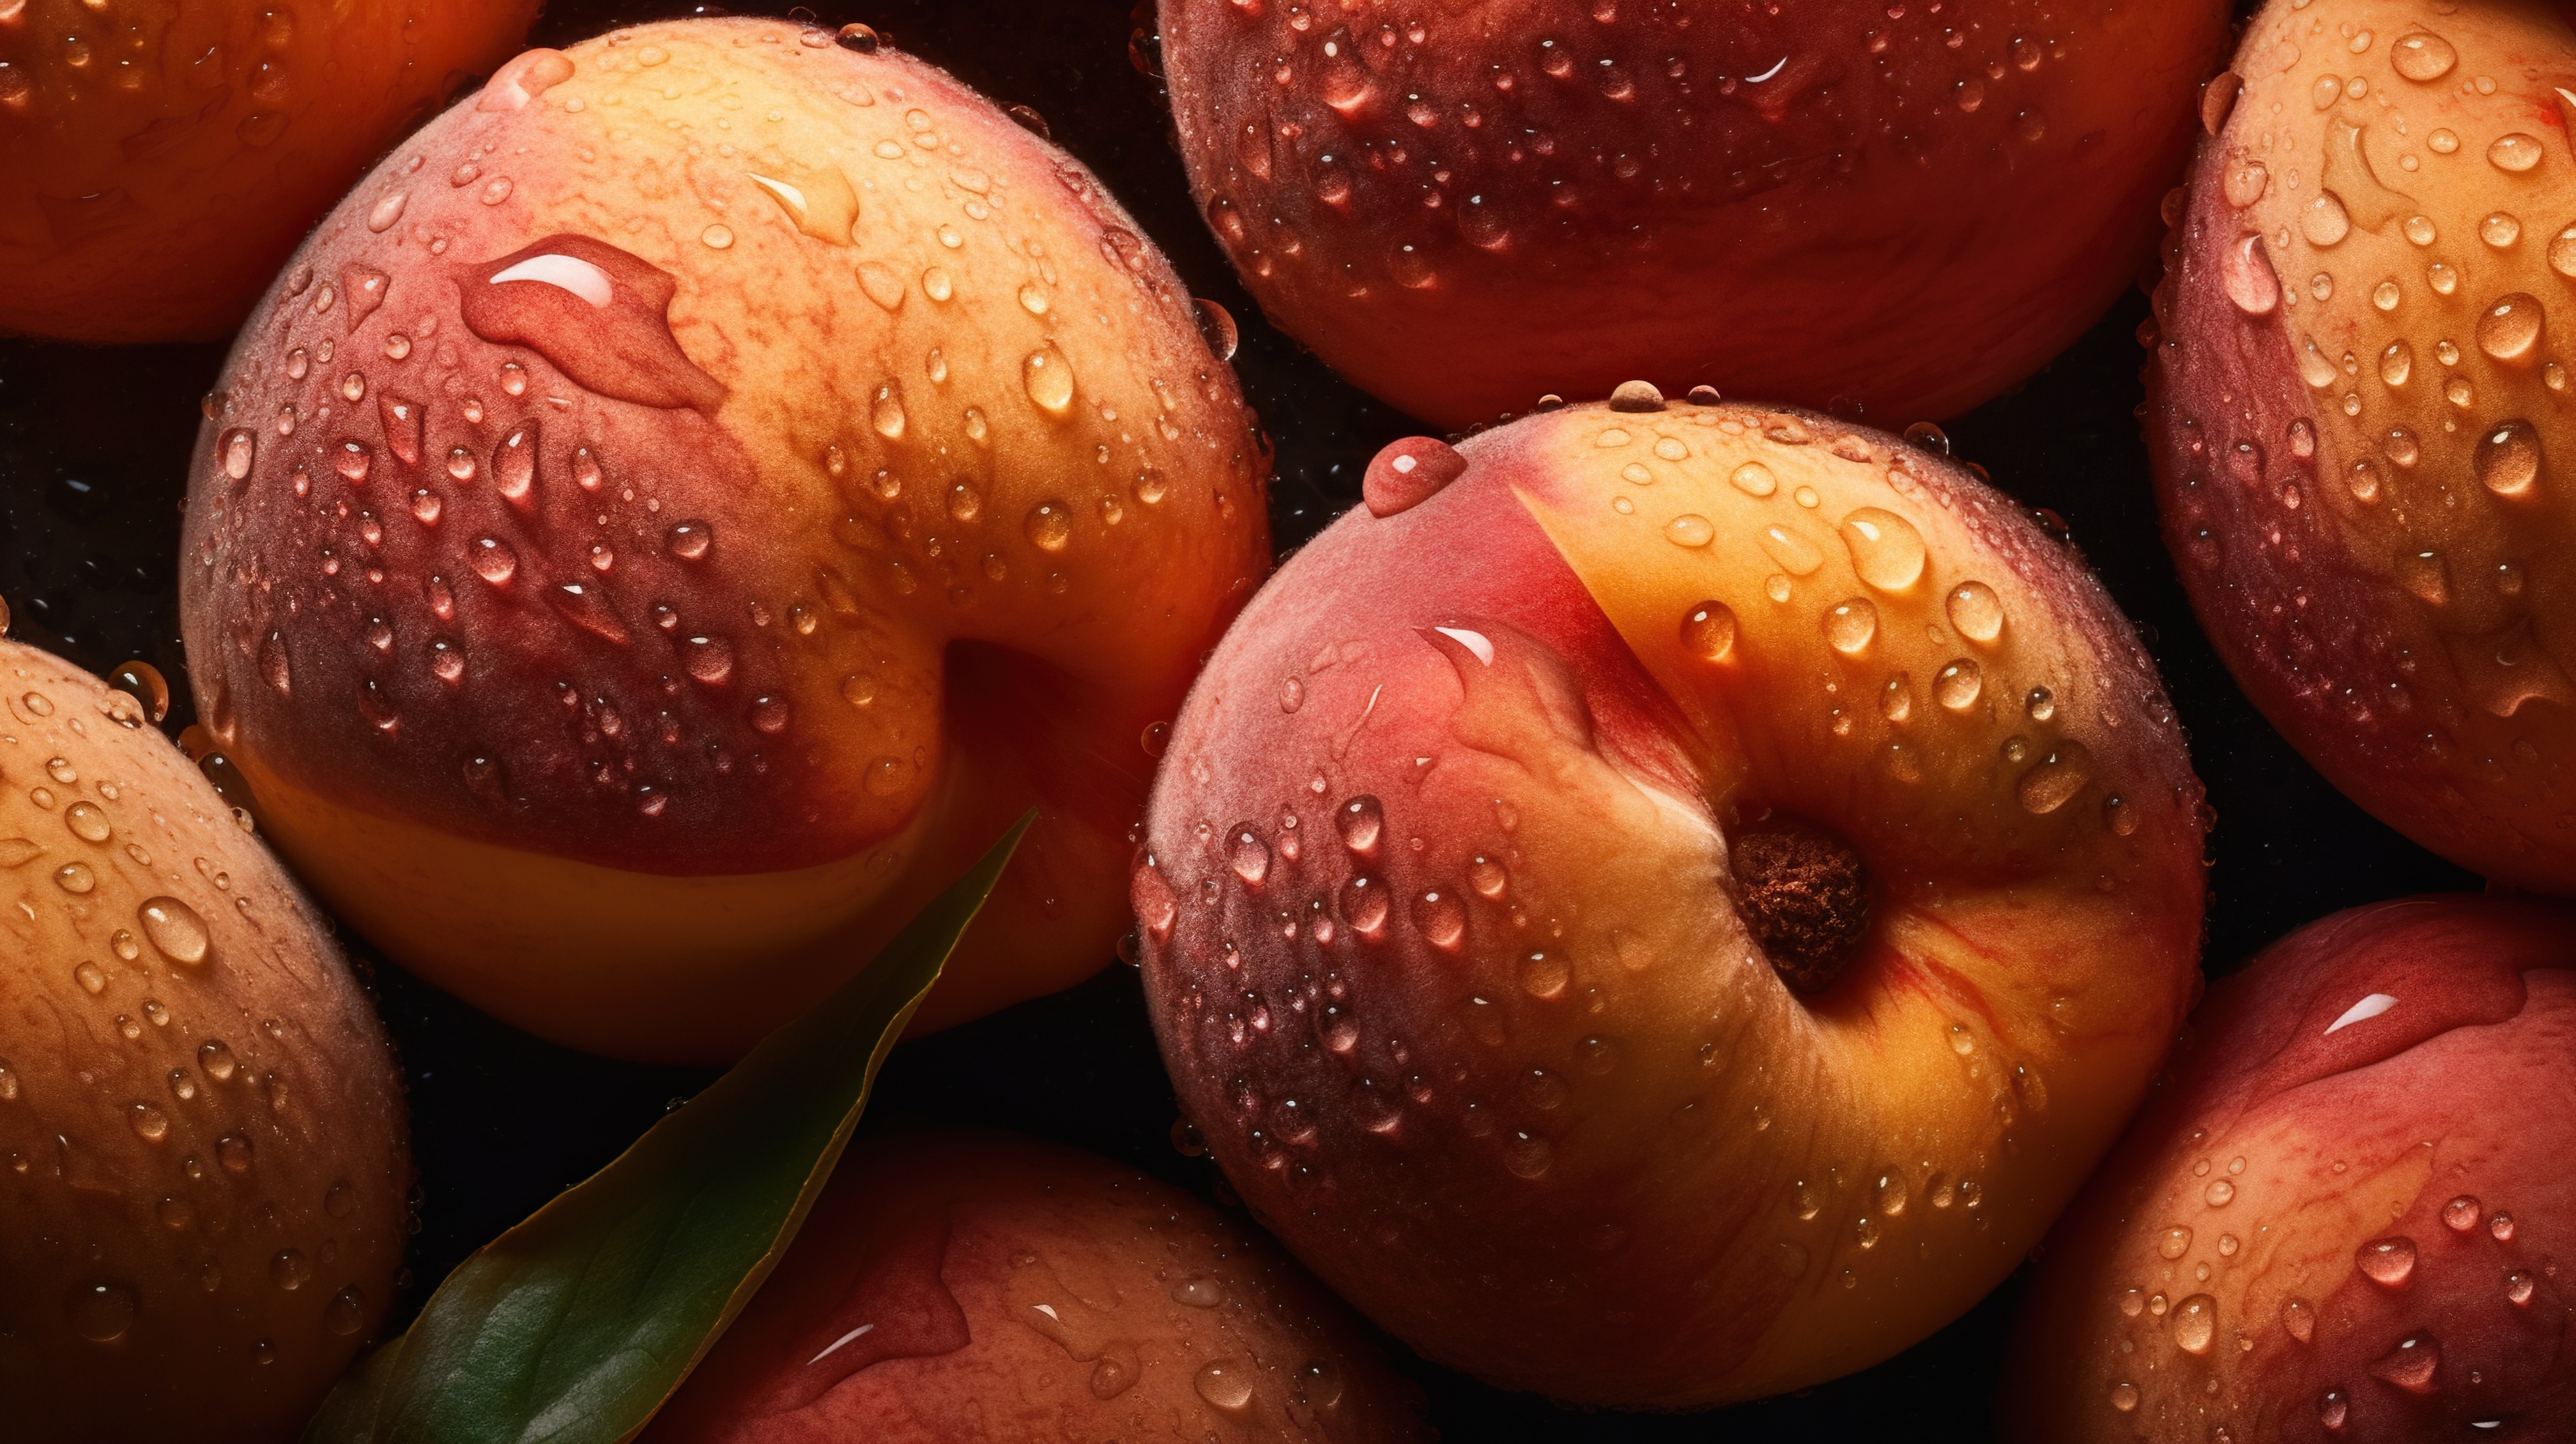 Fresh peaches with water droplets on dark background